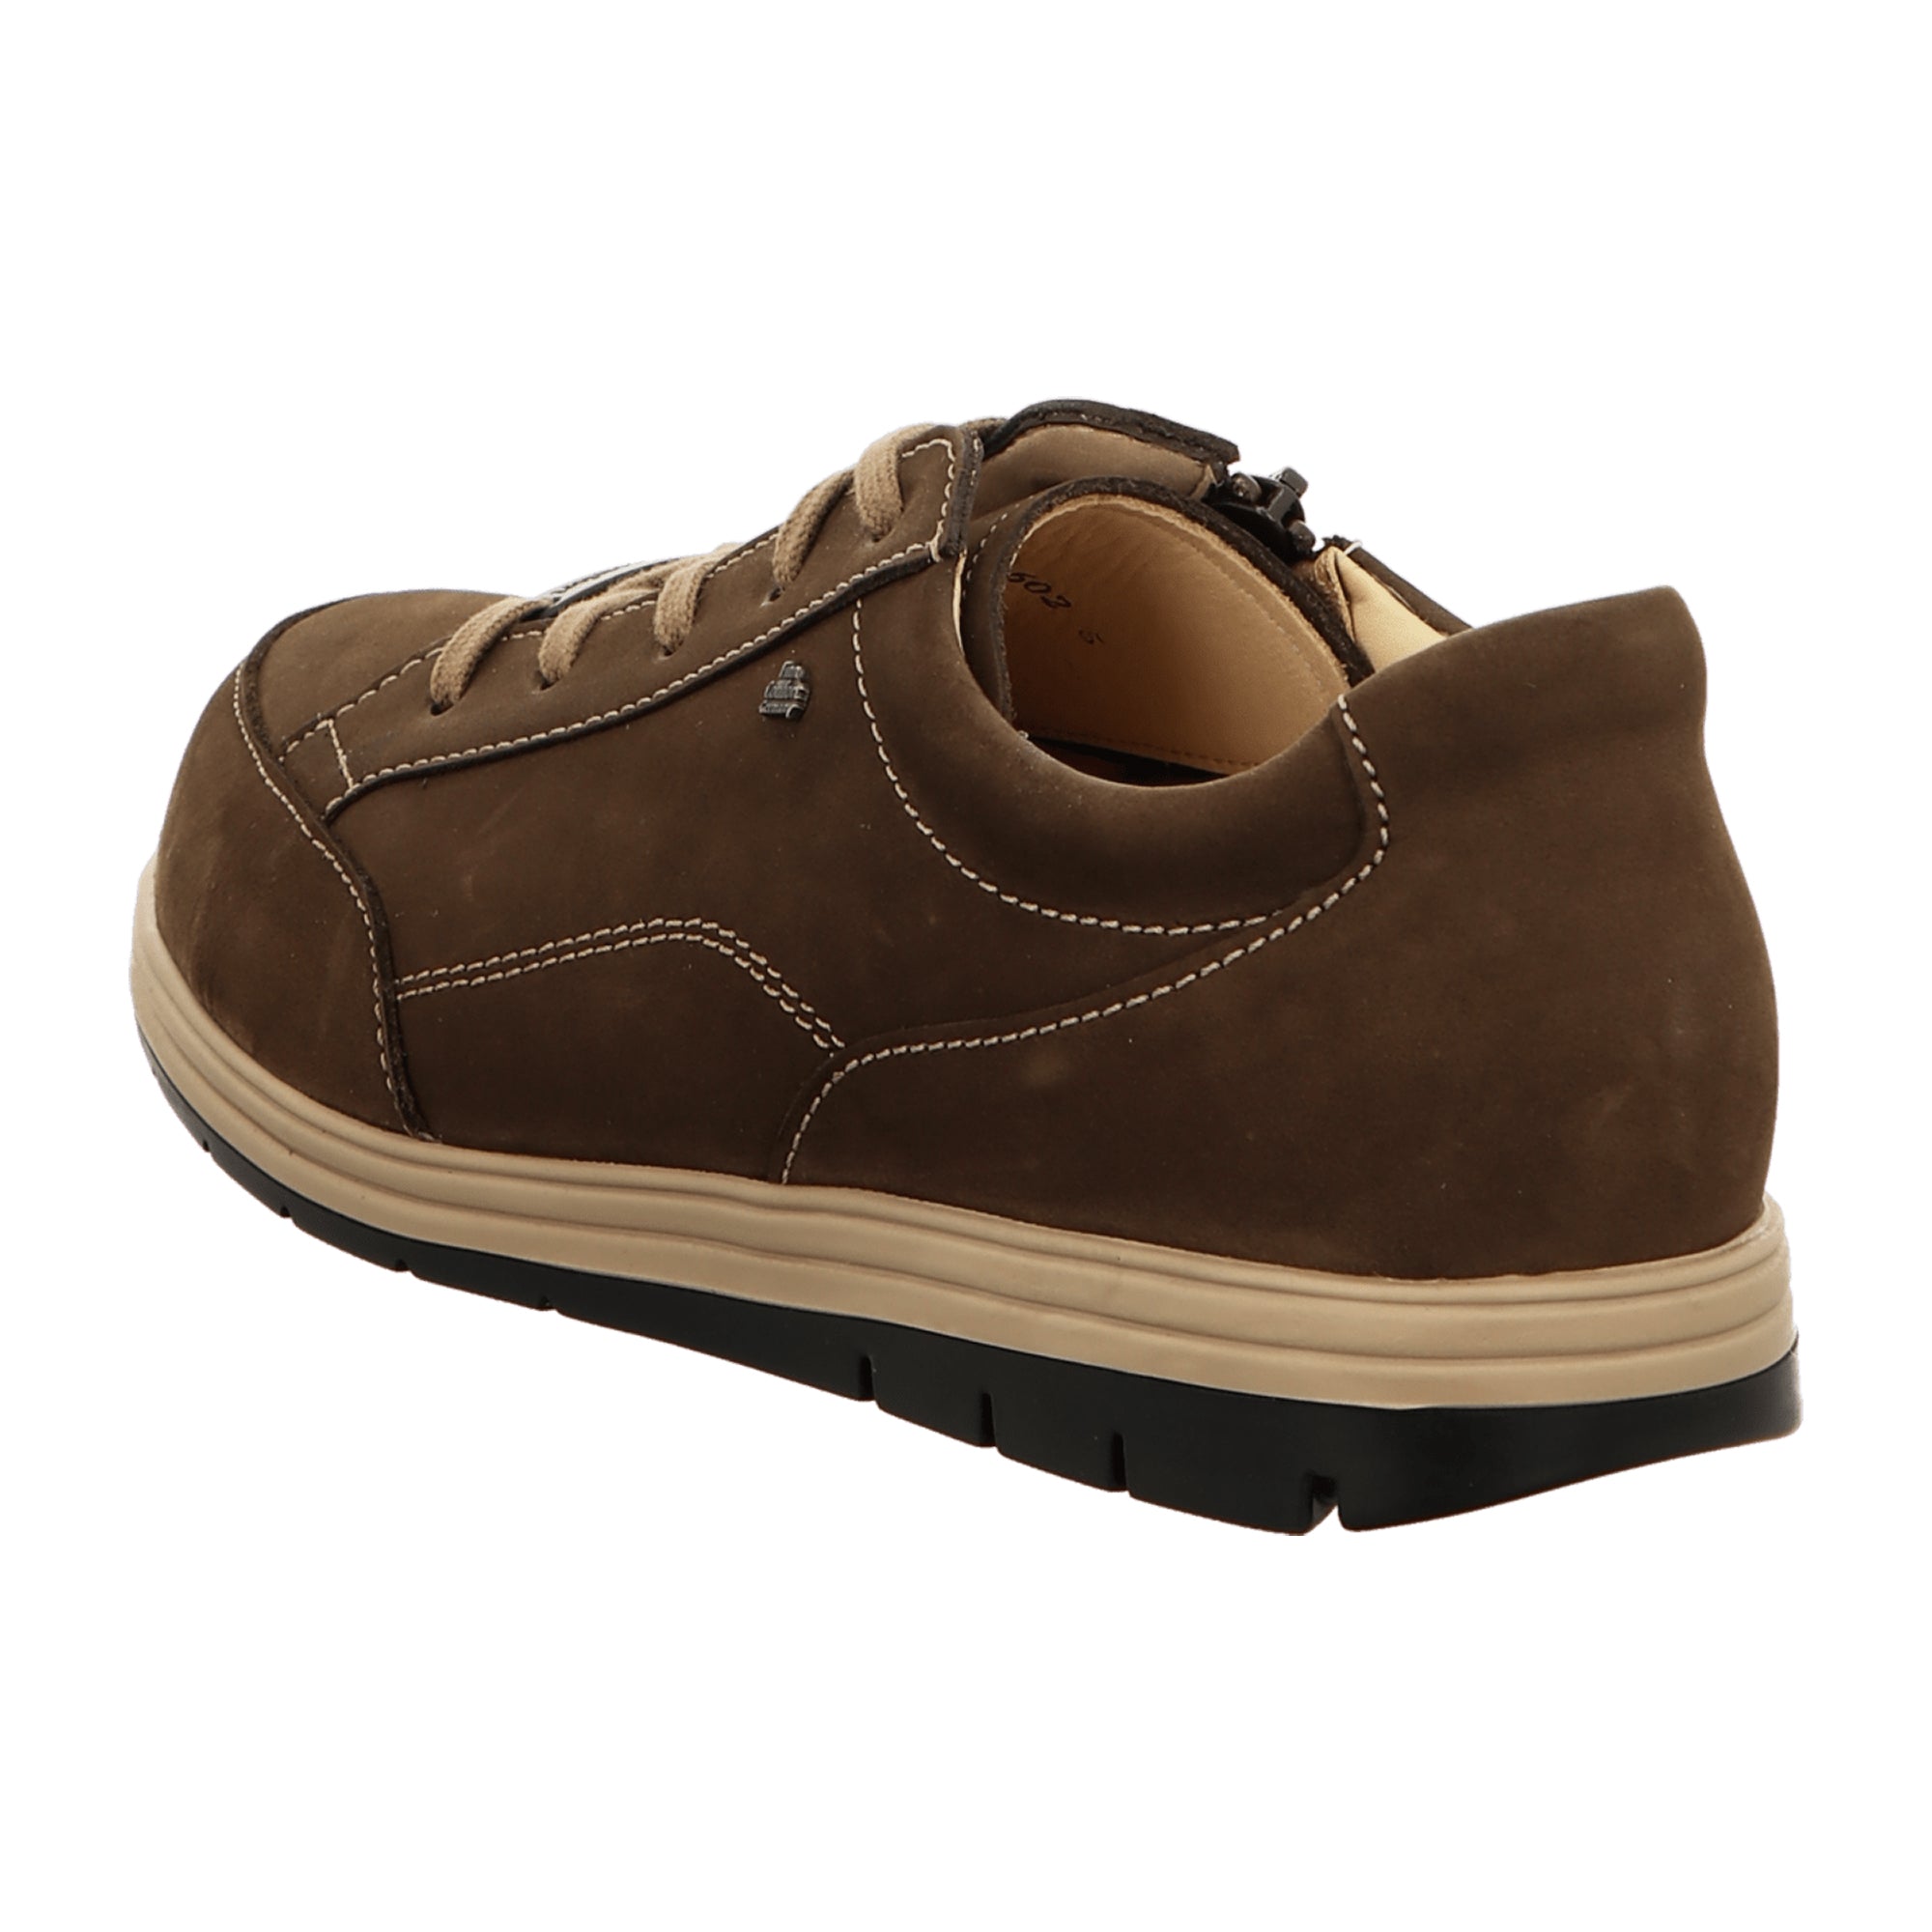 Finn Comfort Osorno Men's Comfortable Leather Shoes in Brown